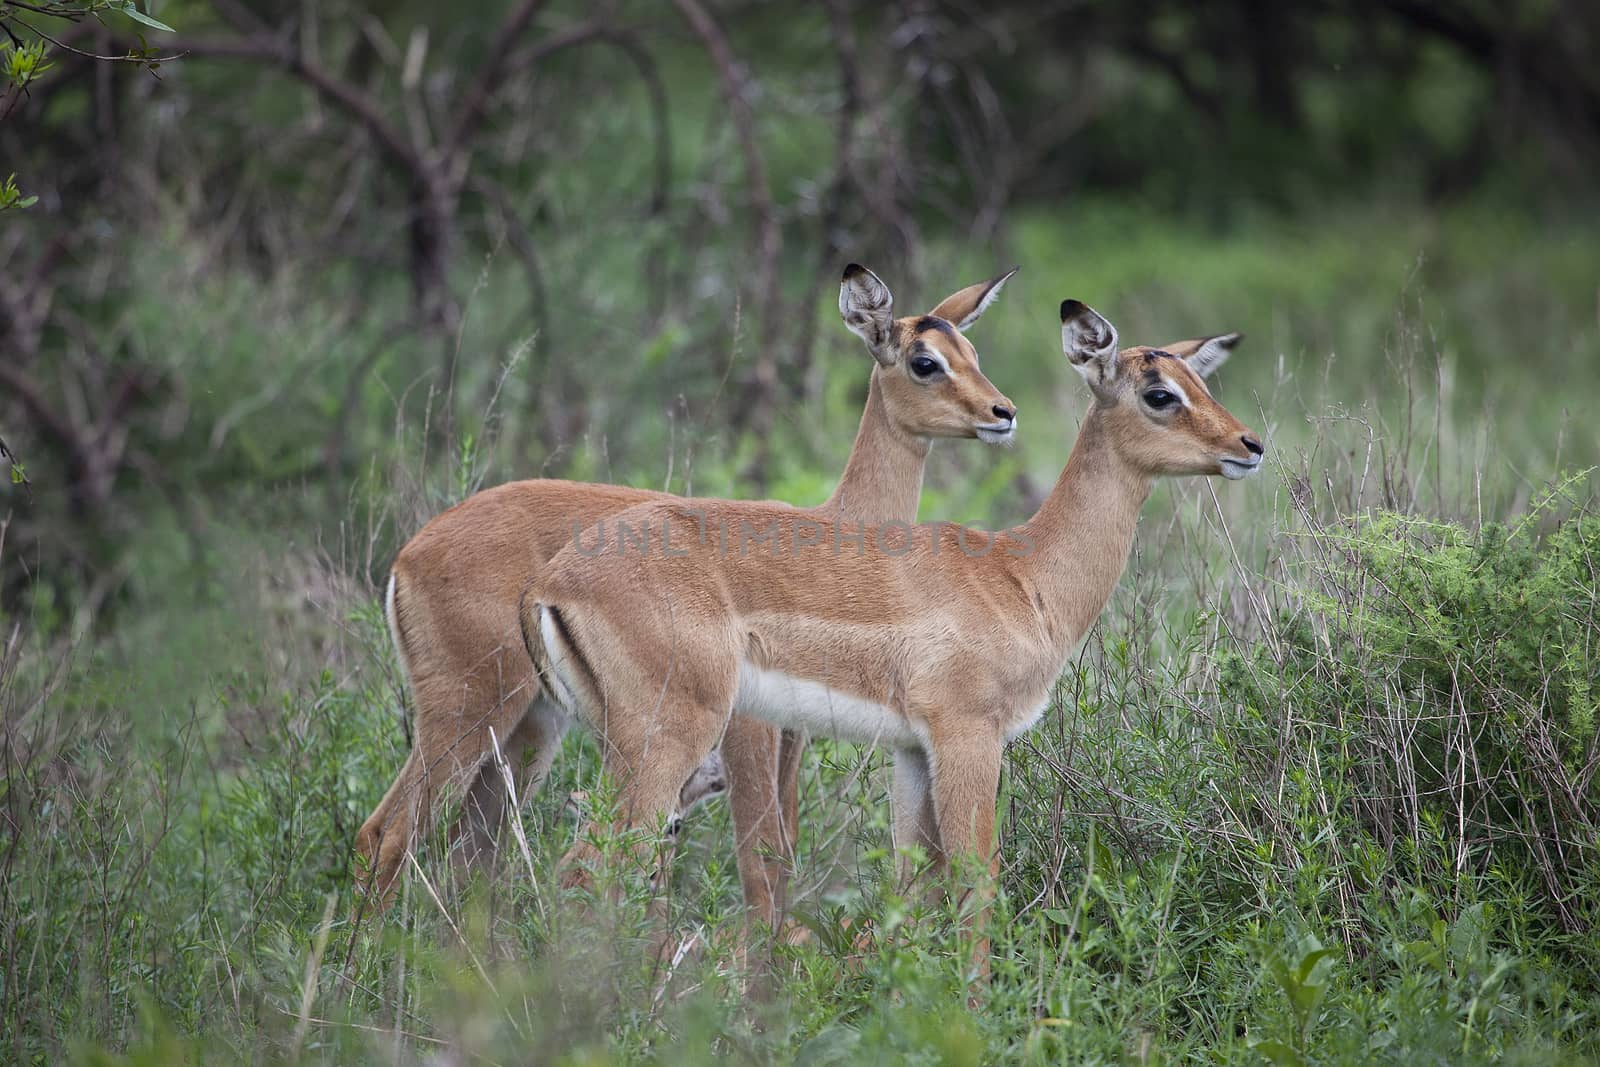 Two baby Impalas standing in the grass